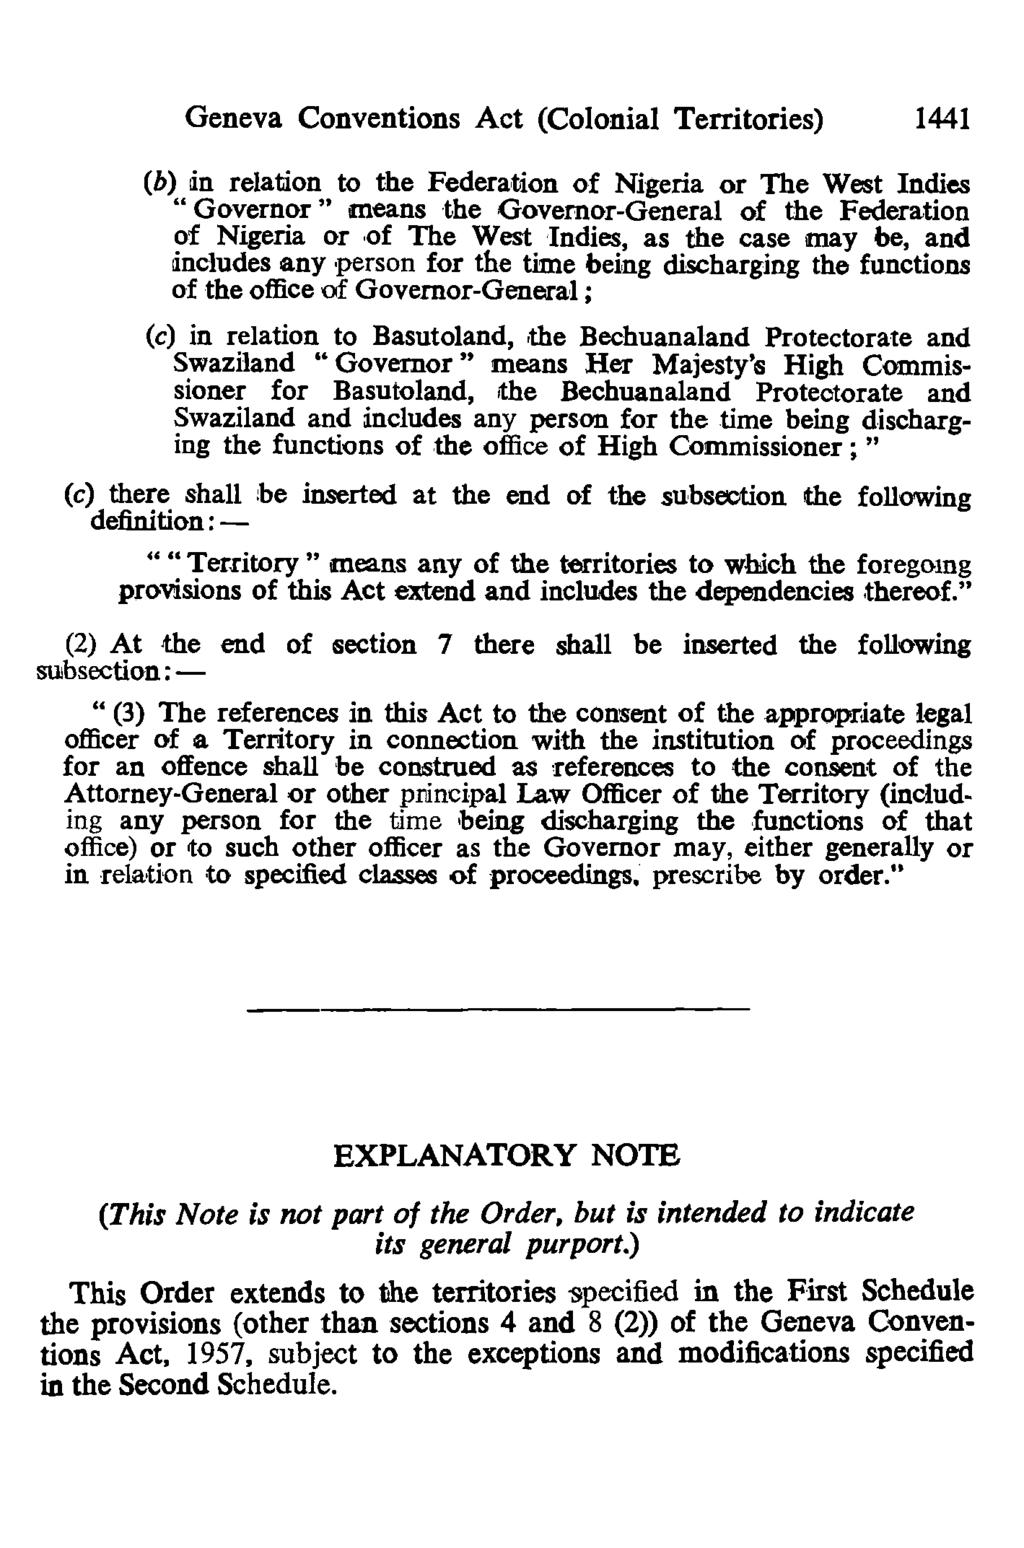 Geneva Conventions Act (Colonial Territories) 1441 (b) in relation to the Federation of Nigeria or The West Indies Governor means the Governor-General of the Federation of Nigeria or of The West